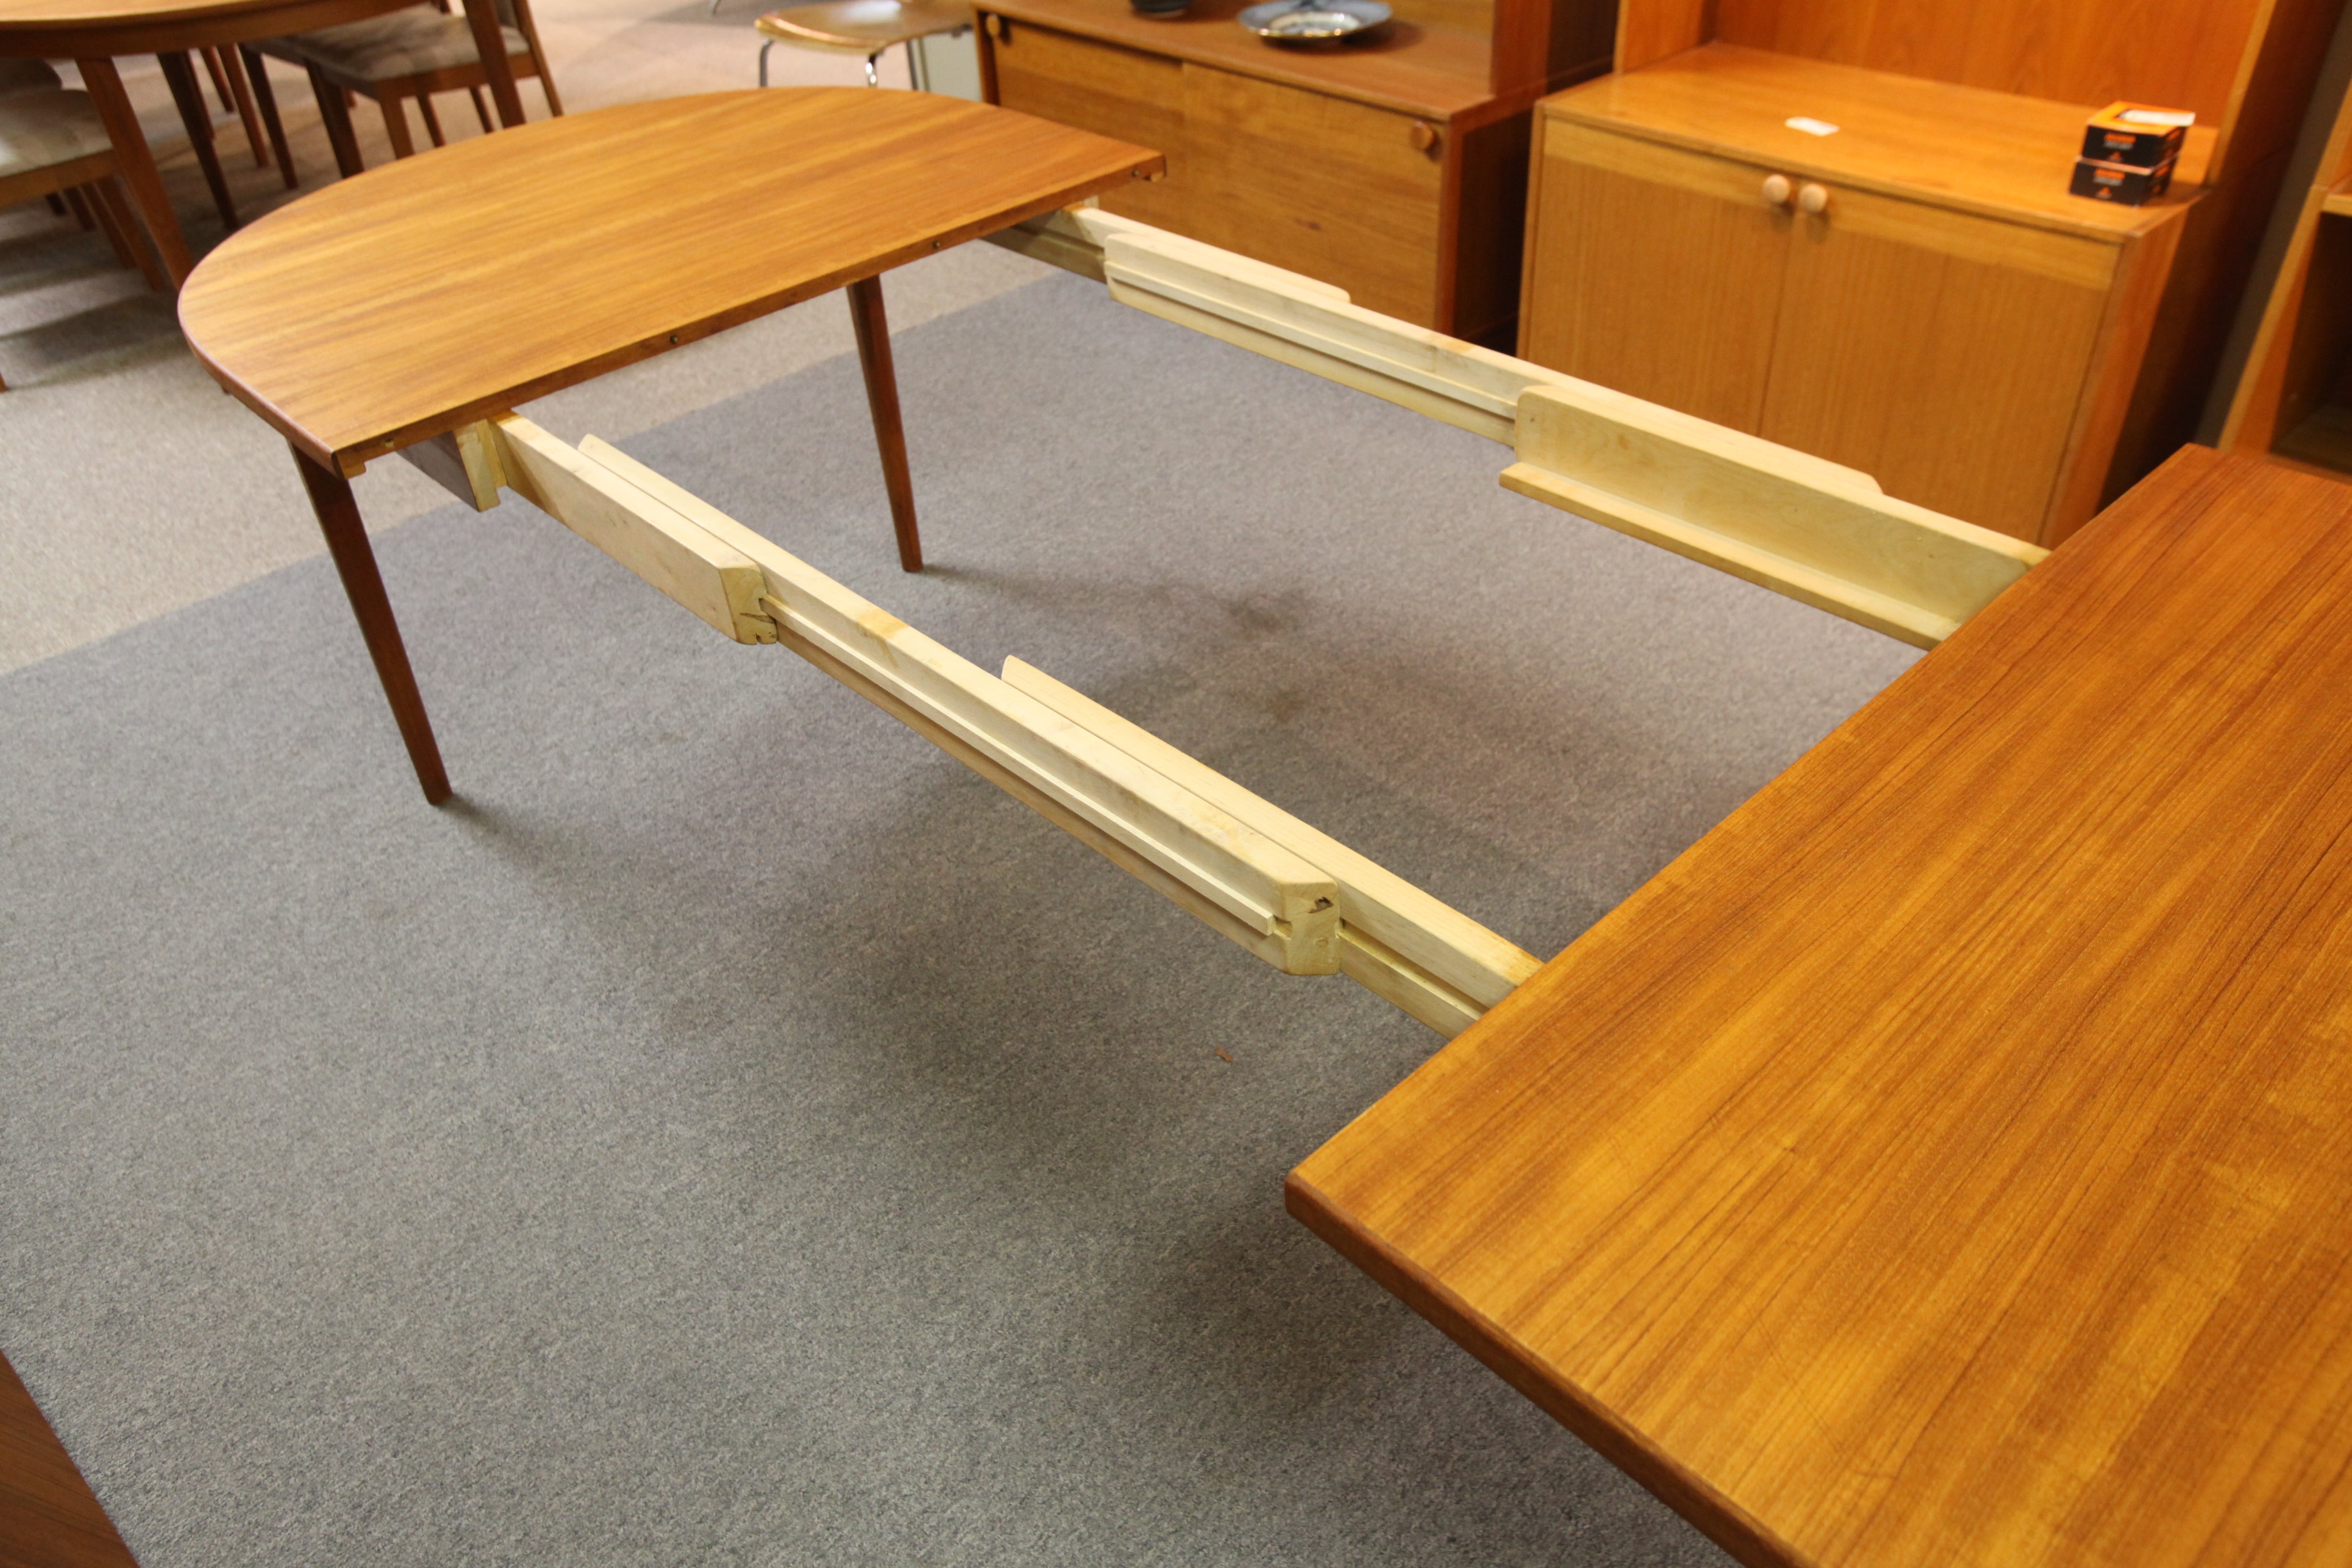 Mid Century Danish Teak Dining Table by Nils Jonsson for Troeds (104" x 39.5") (61"x39.5")